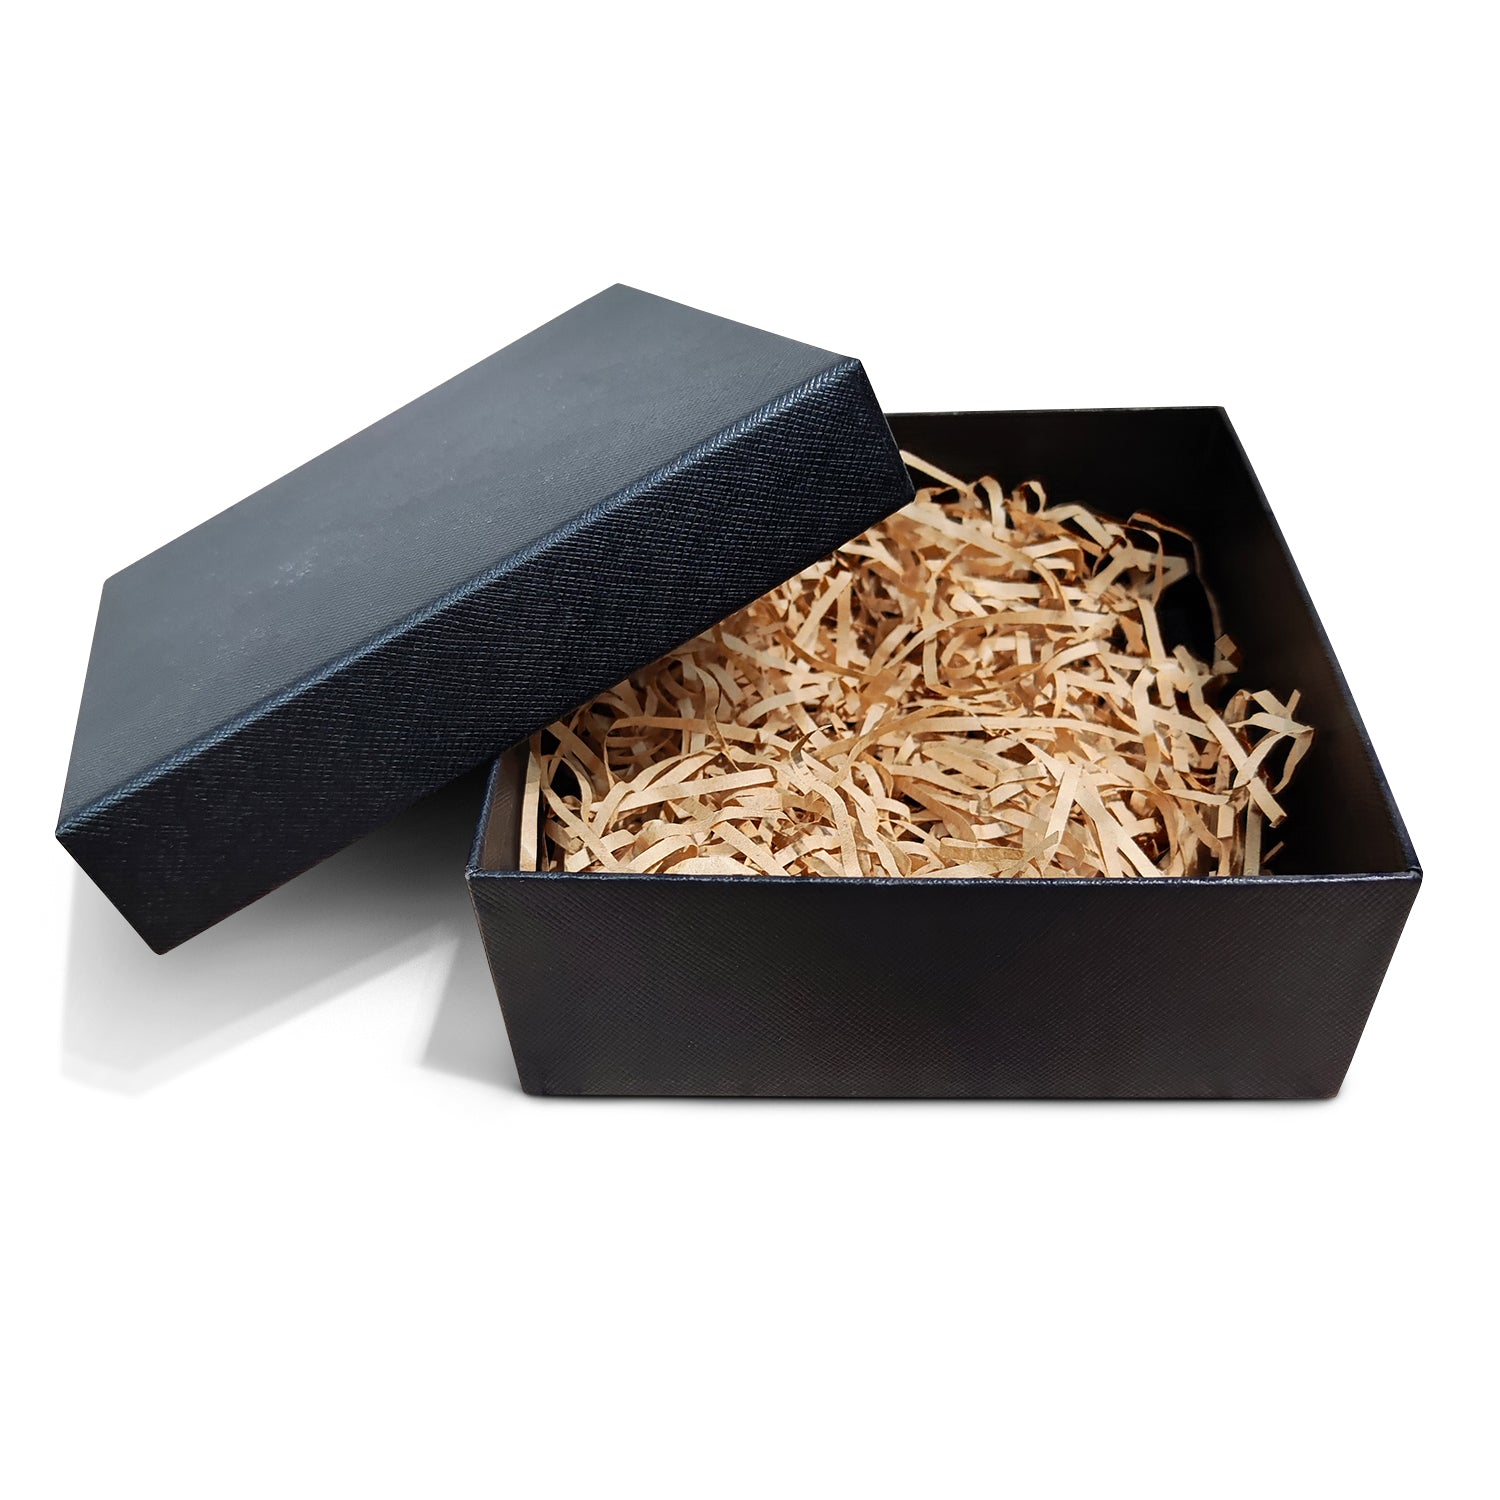 Extra - upgrade to our elegant gift box with shredded paper filler